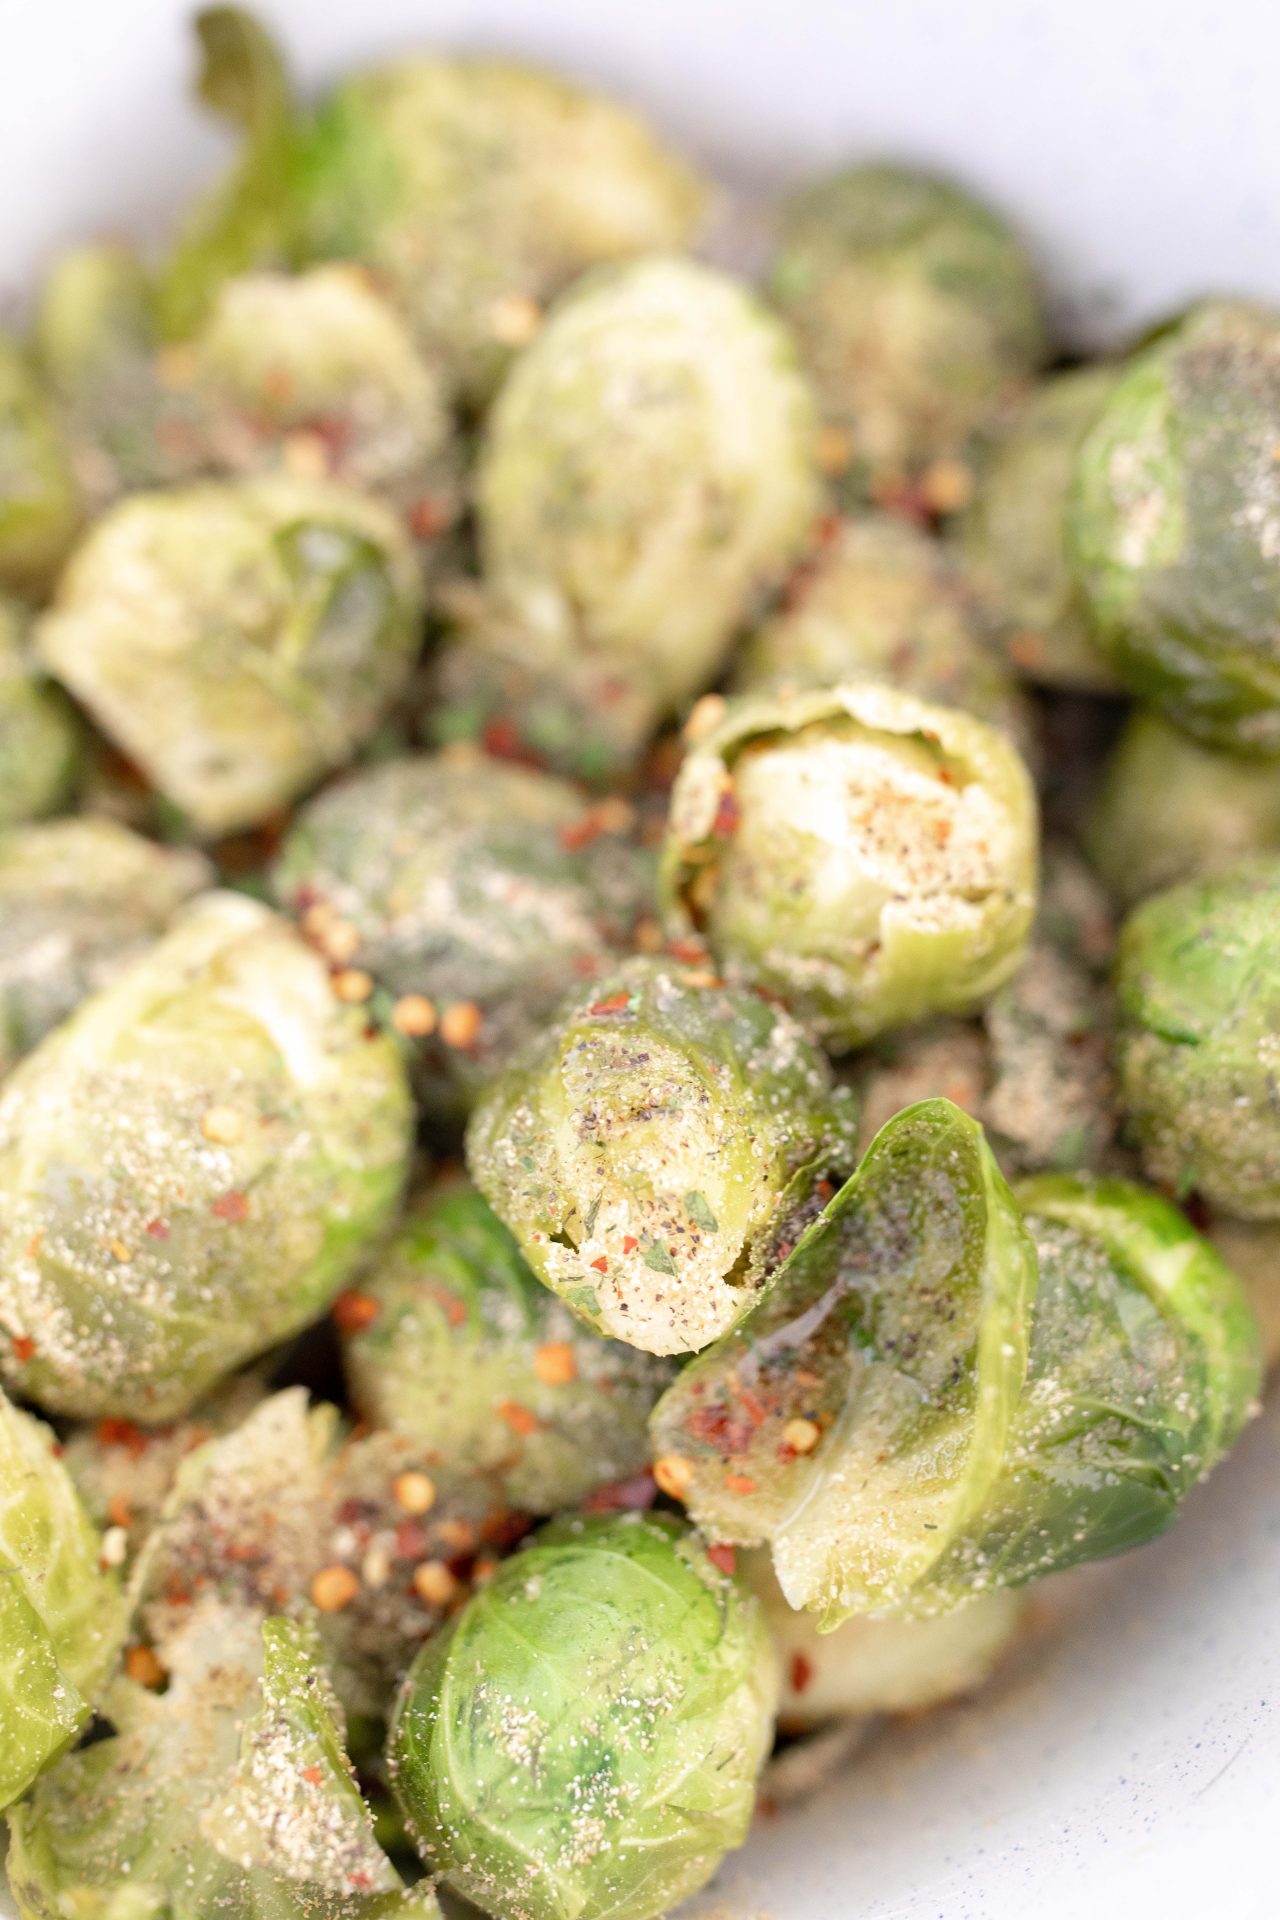 honey soy brussels sprouts, crispy brussel sprouts made at home, honey soy sauce, gluten-free, vegetarian, healthy eating, dinner recipe, Brussels,